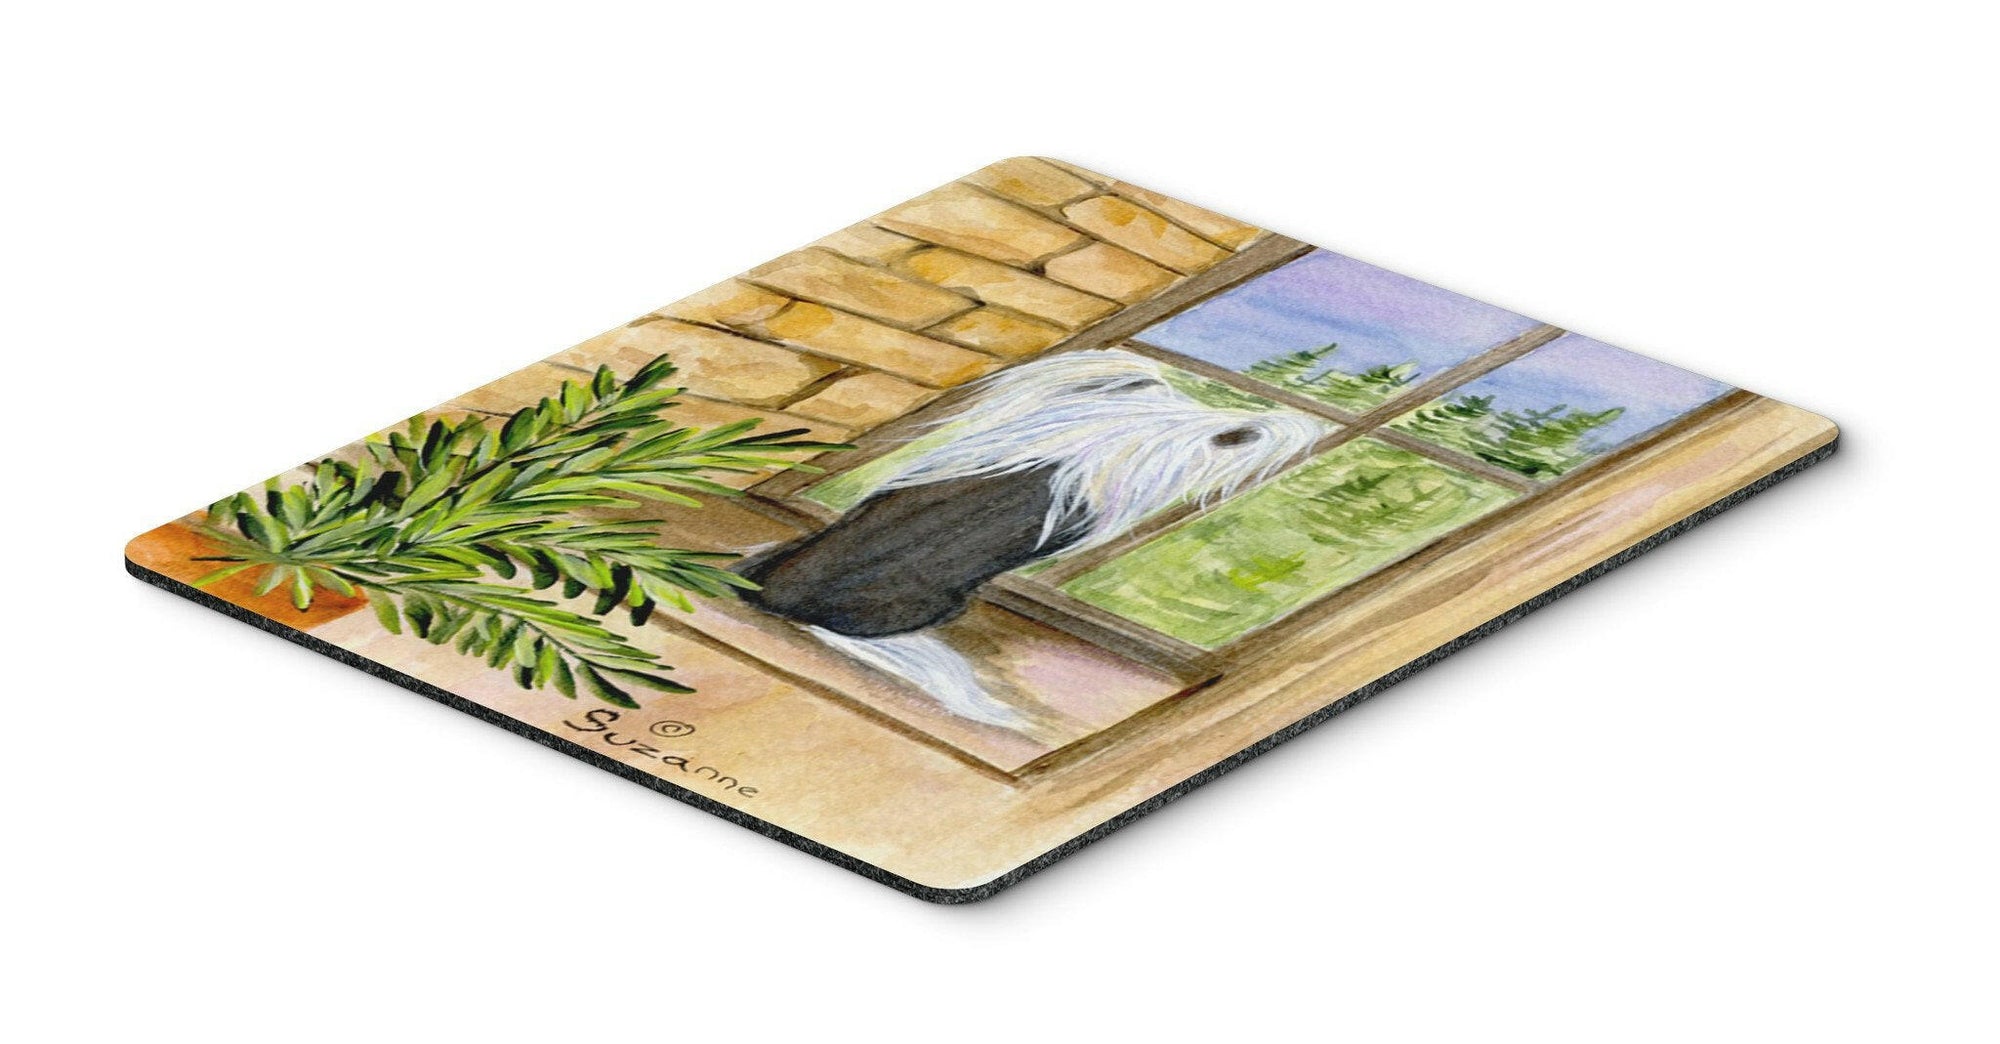 Chinese Crested Mouse Pad / Hot Pad / Trivet by Caroline's Treasures